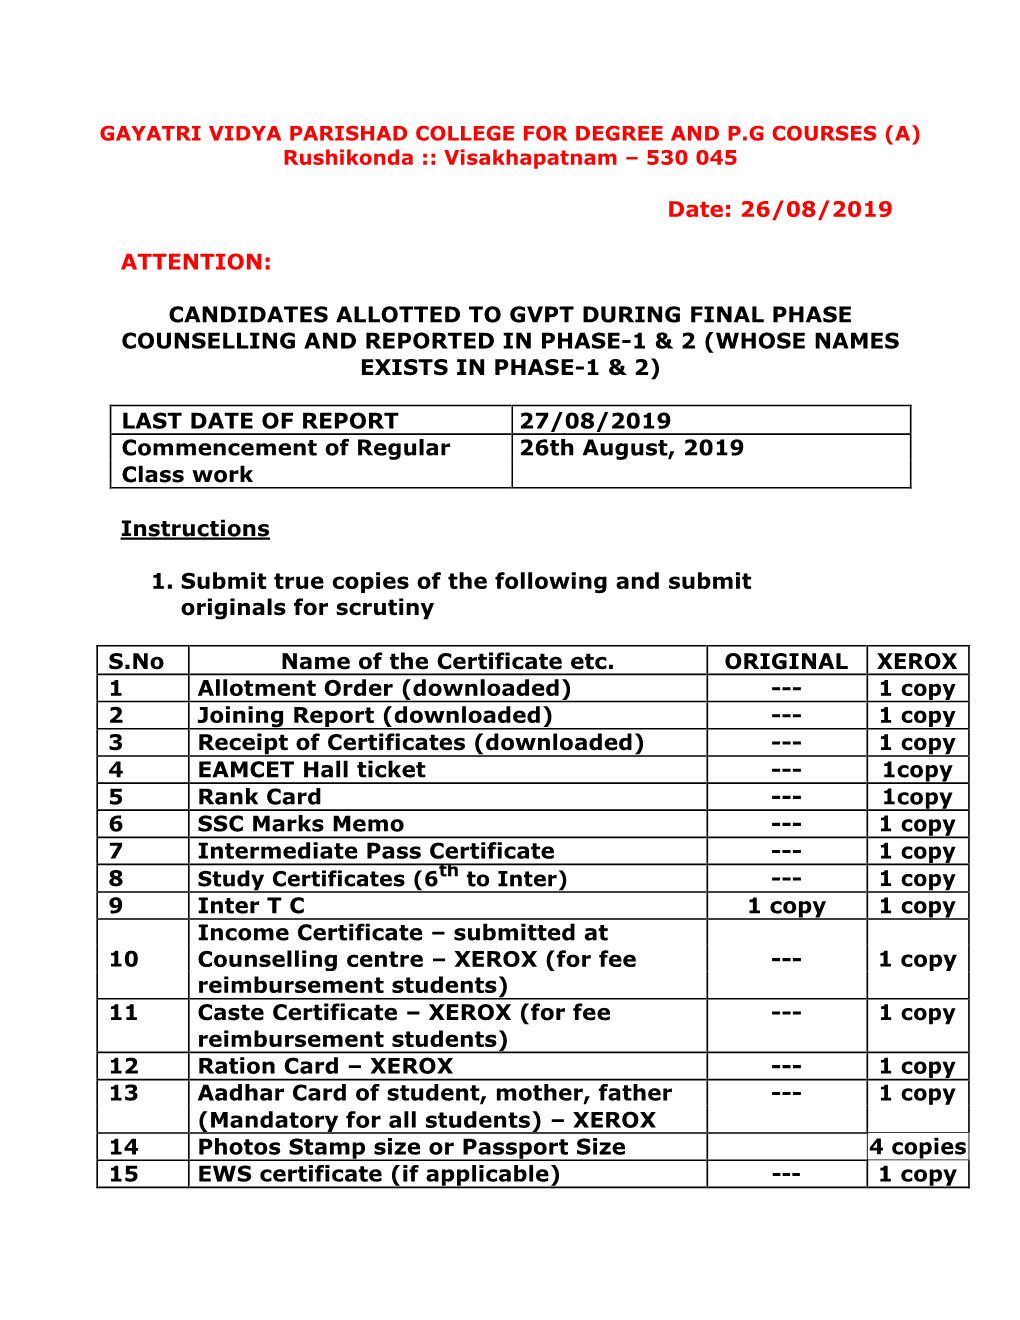 Candidates-Allotted-To-GVPT.Pdf